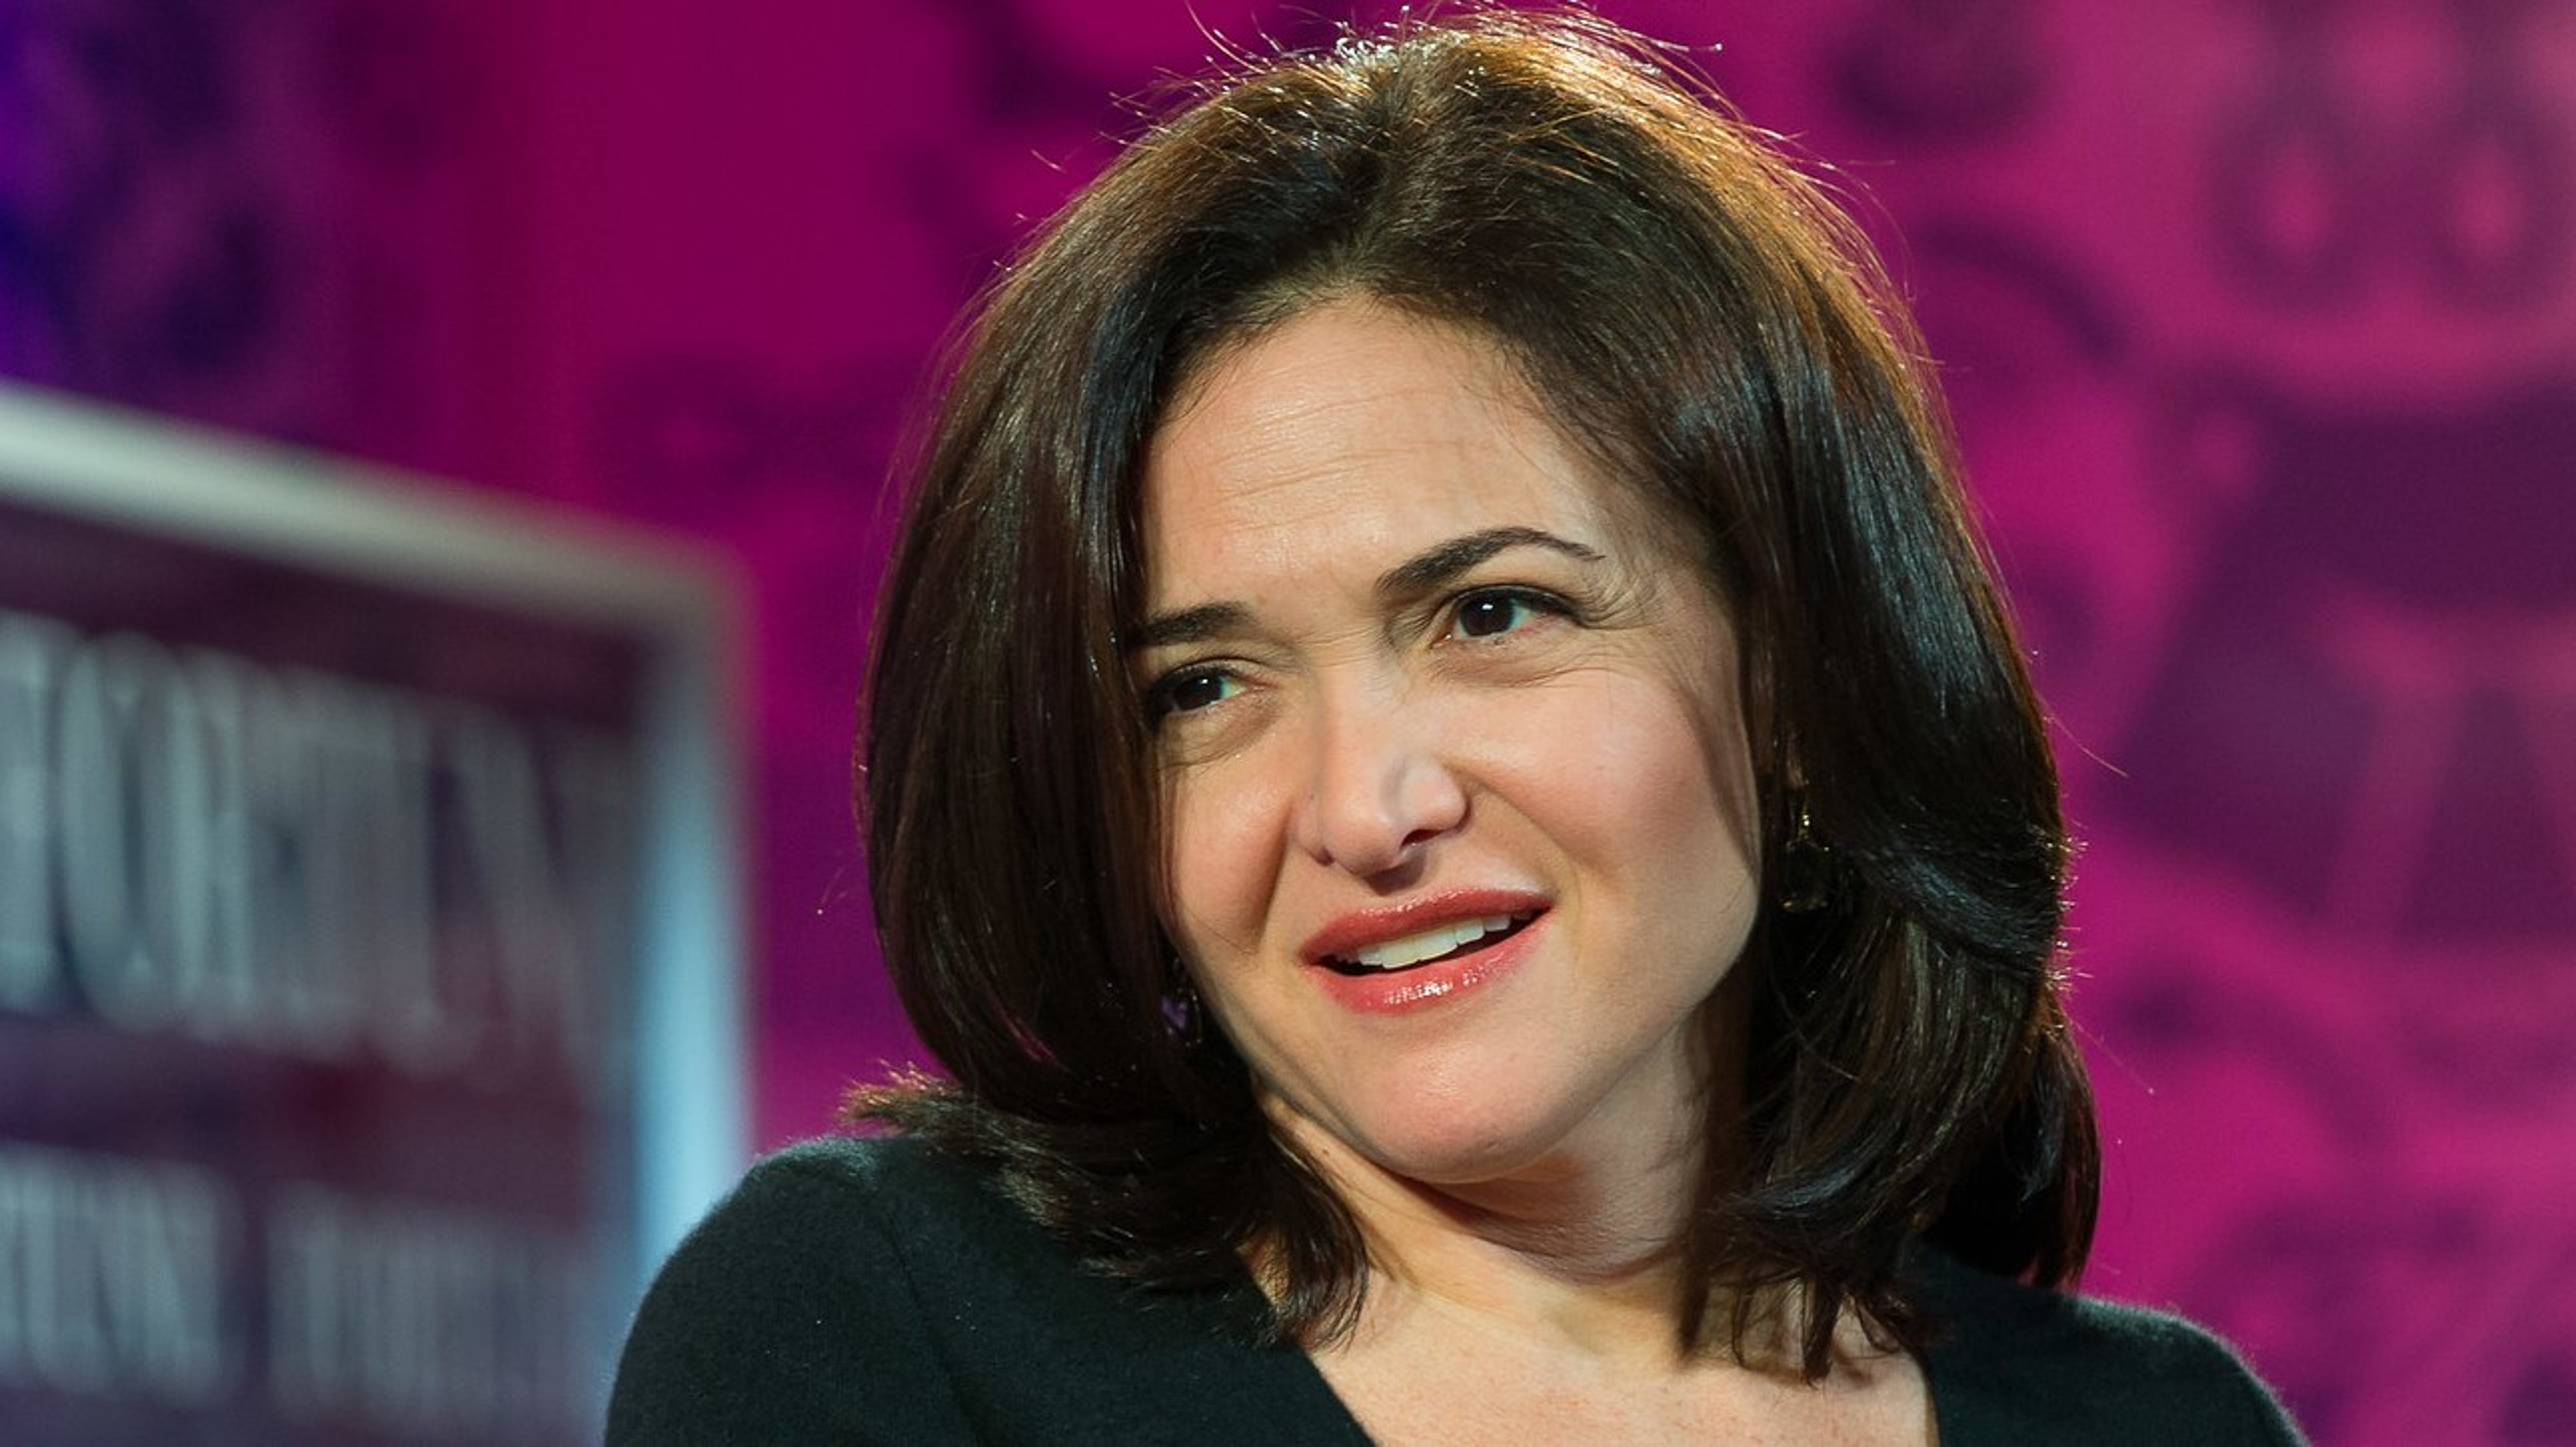 As Facebook Gives Sheryl Sandberg A Send-off, A Probe Underway On Resource Misappropriation: Report